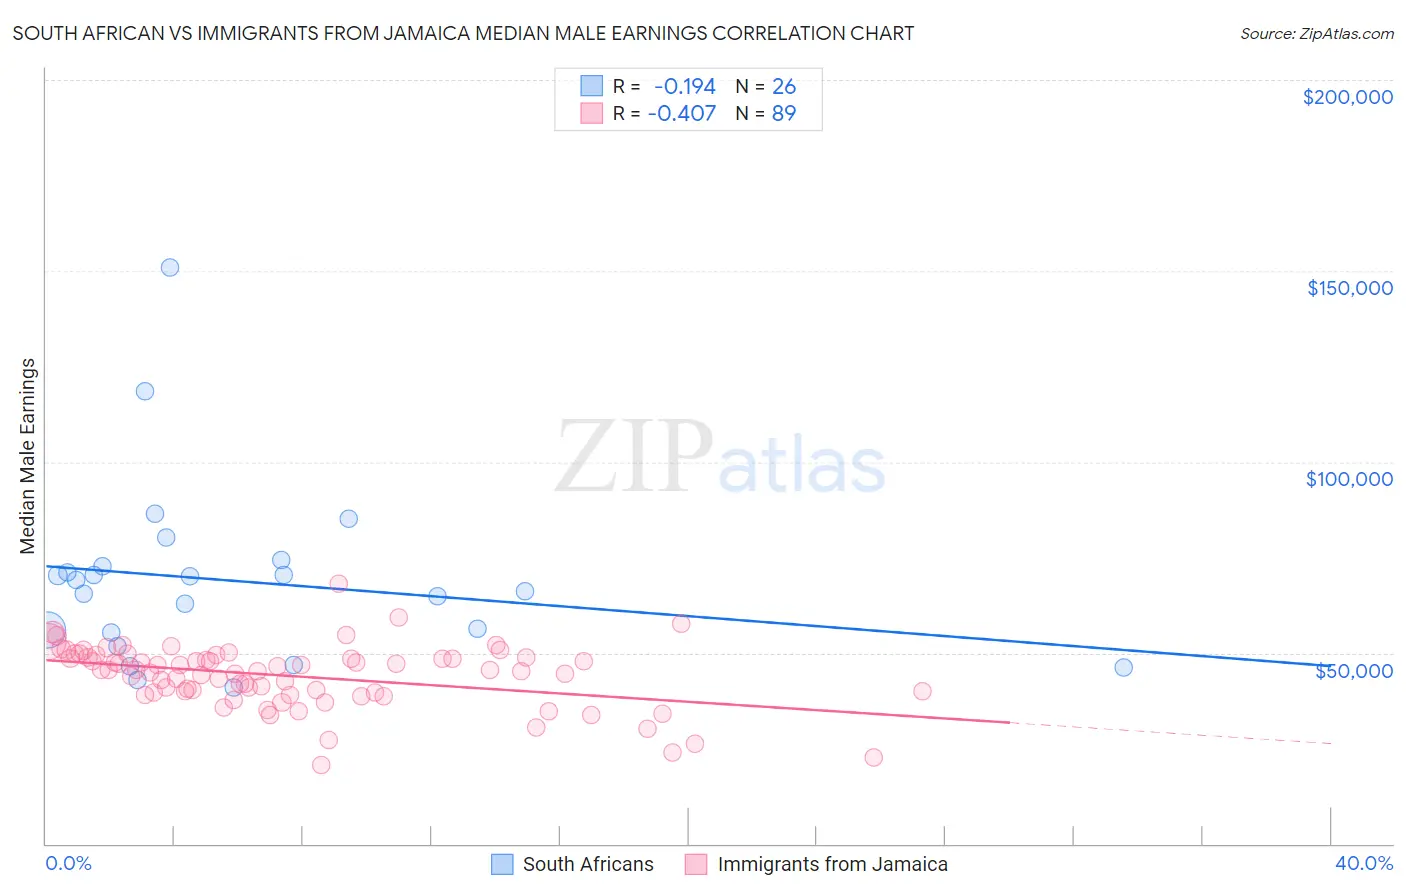 South African vs Immigrants from Jamaica Median Male Earnings